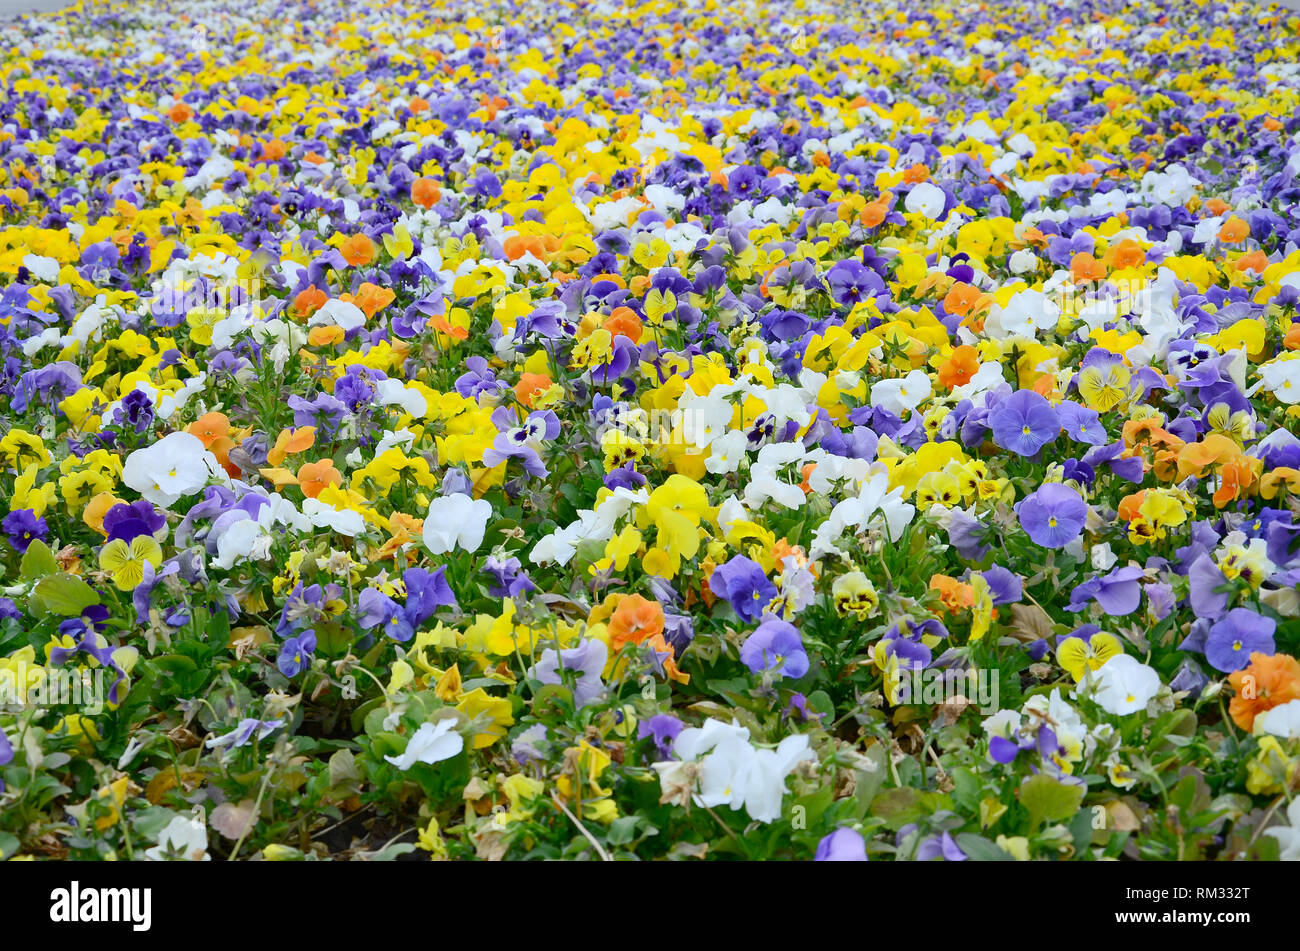 Multicolor pansy flowers or pansies as background or card. Field of colorful pansies with white yellow and violet pansy flowers on flowerbed in perspe Stock Photo